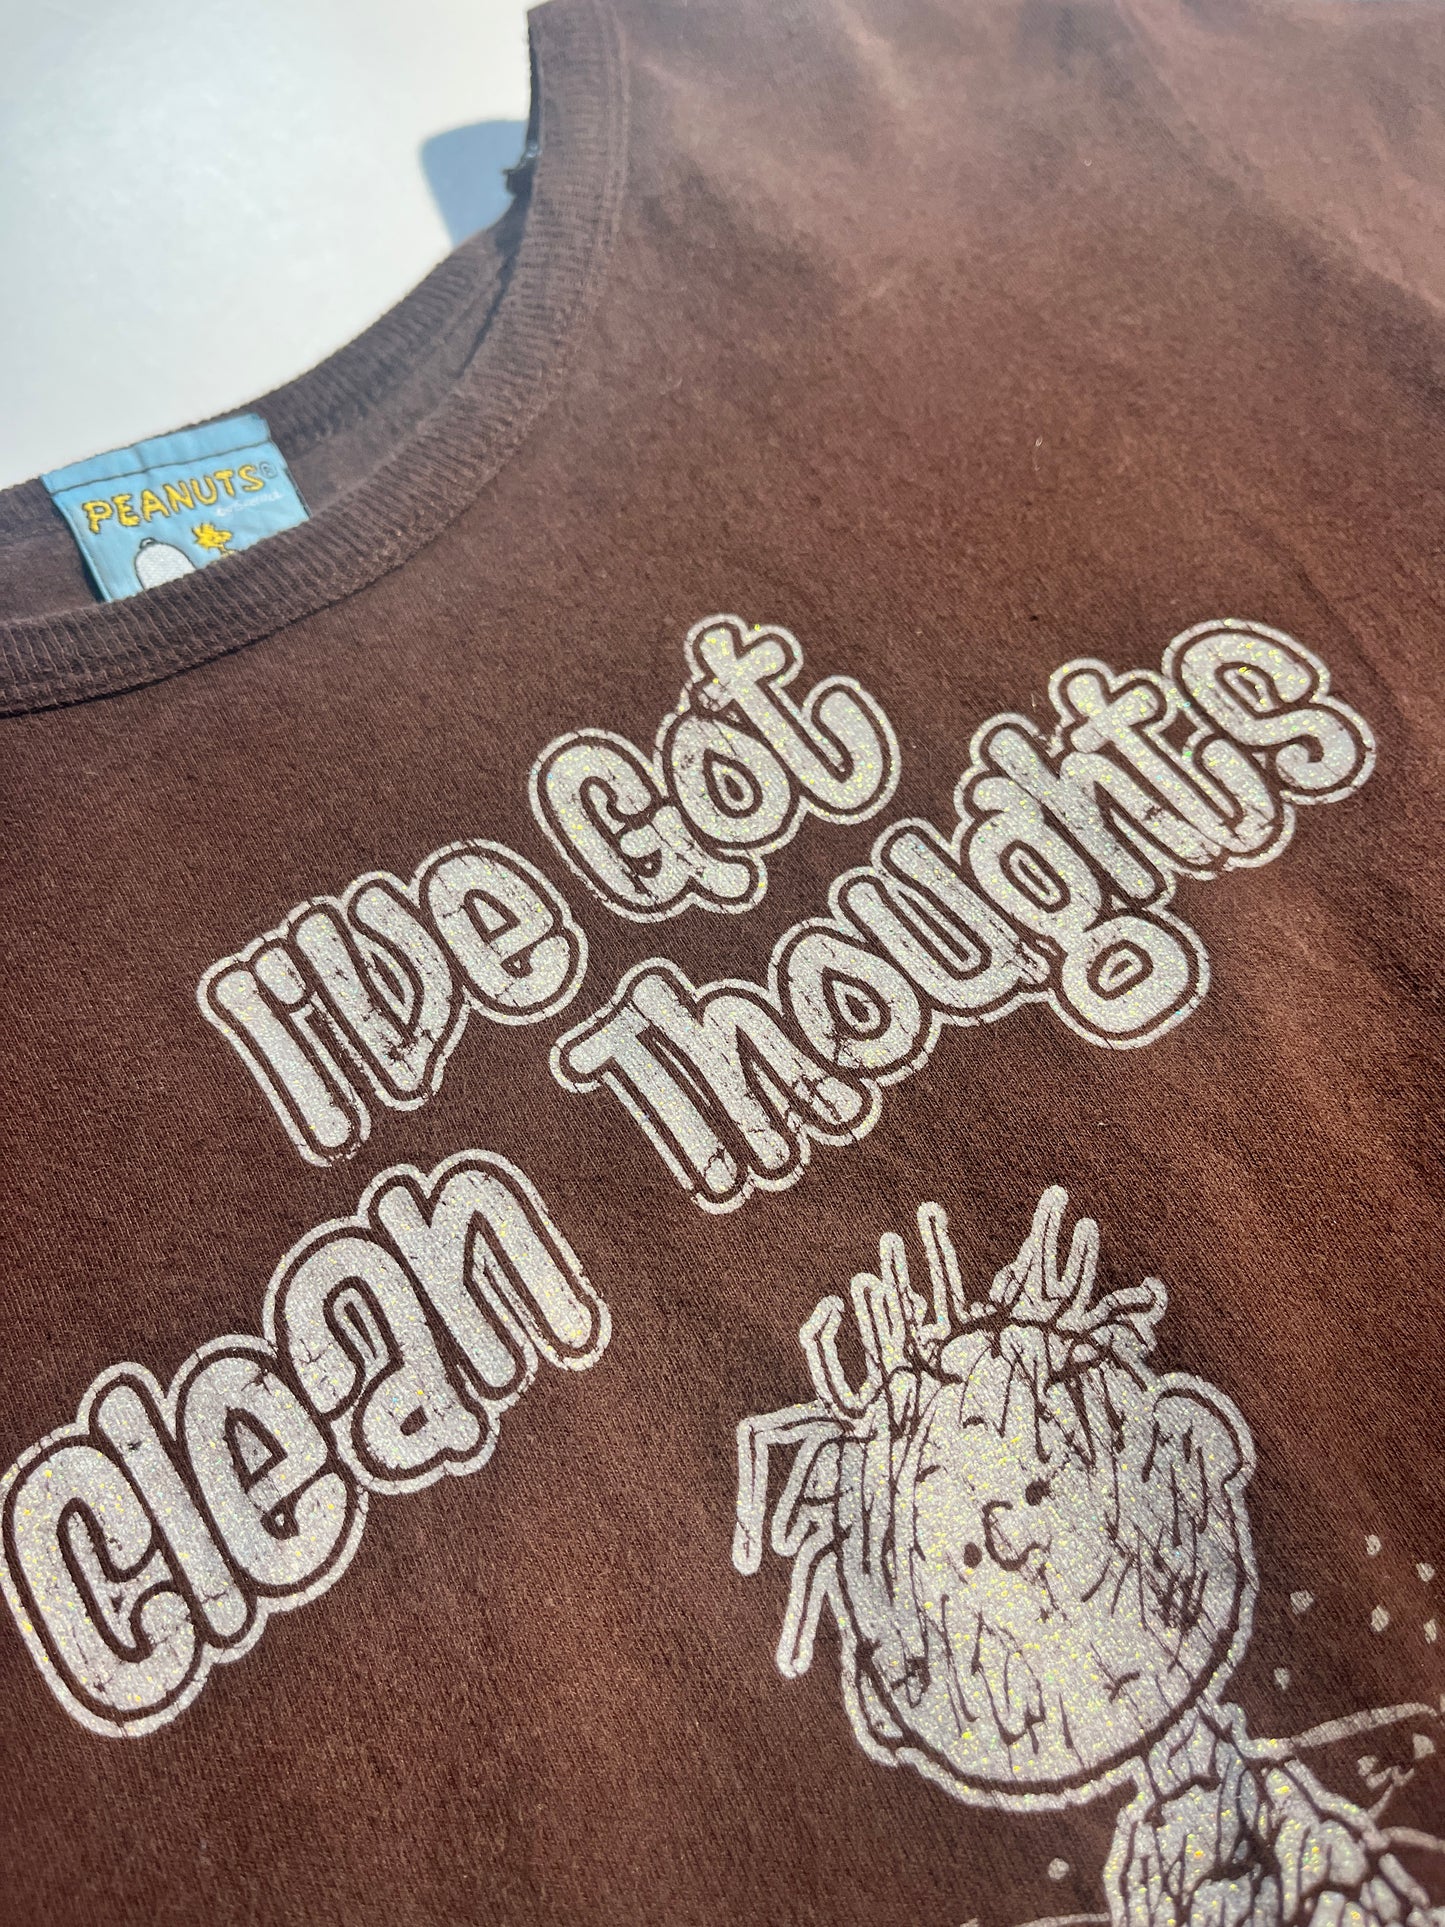 Vintage Peanuts T-Shirt I've Got Clean Thoughts Slogan Baby Tee